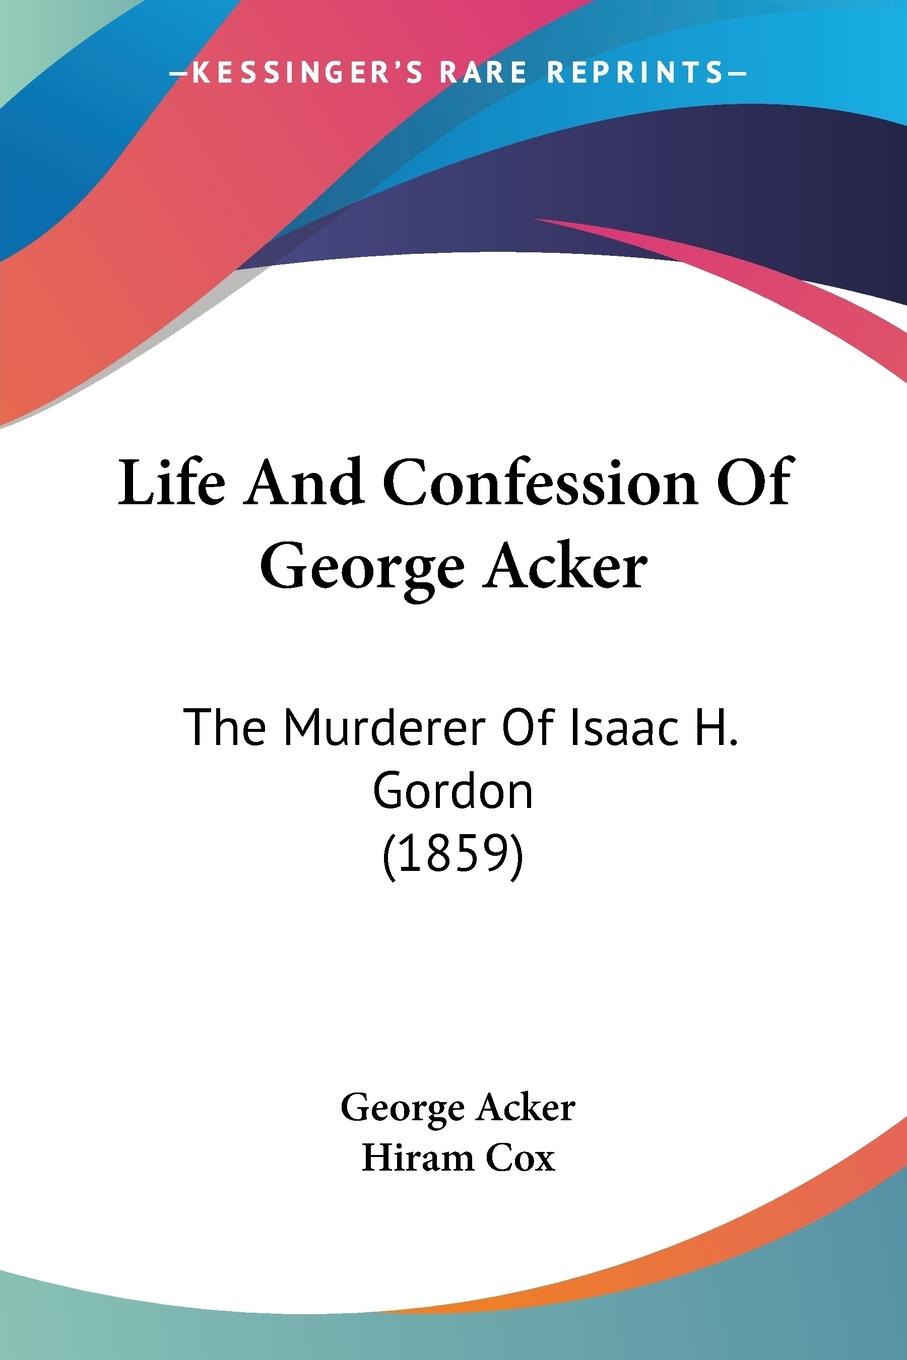 Life And Confession Of George Acker - Acker, George Cox, Hiram